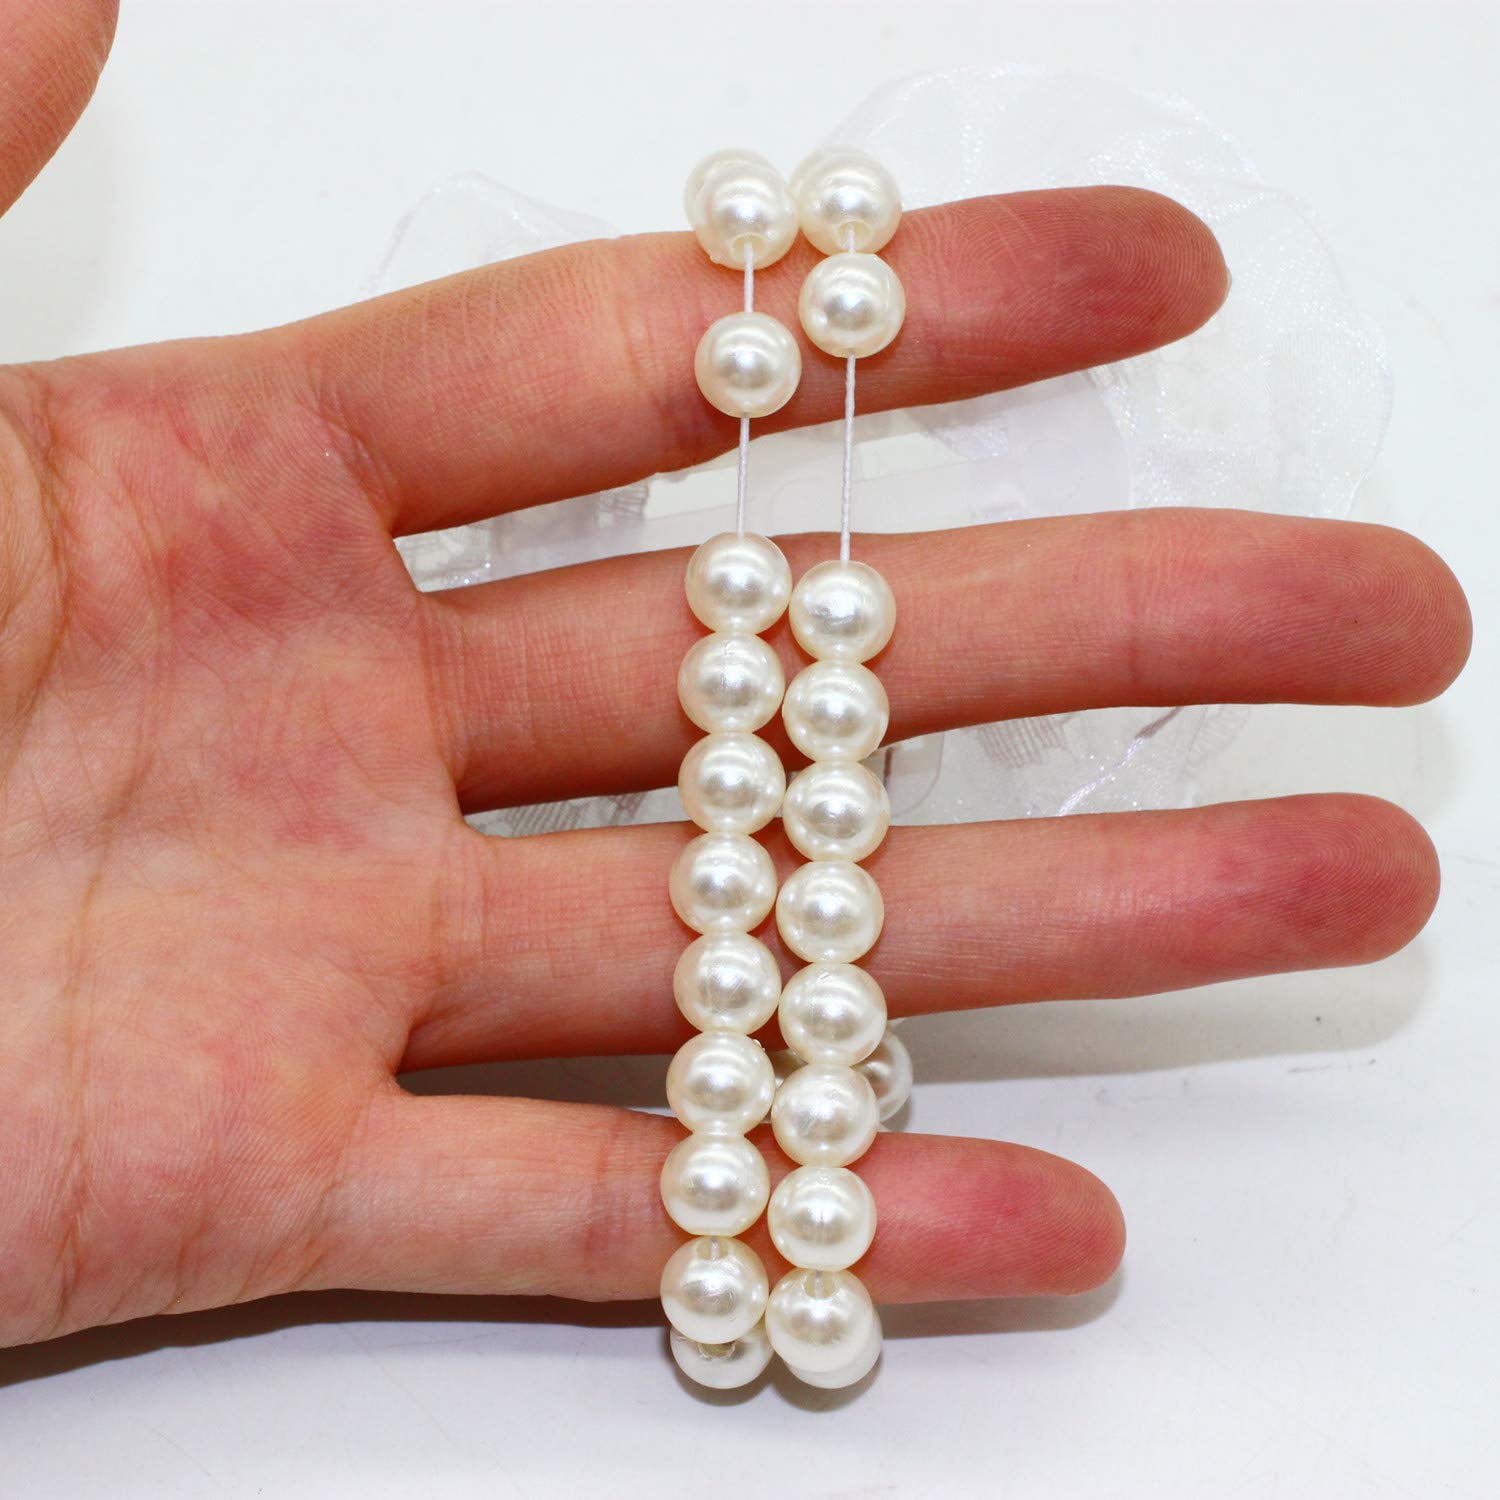 Elastic Pearl Bands Wrist Corsage Bands Wedding Corsages Pearl Bracelet 20  Pack Elastic Pearl Wedding Wristlets DIY Wrist Corsages Accessories for  Wedding Prom Hand Flowers Beach Party (White)